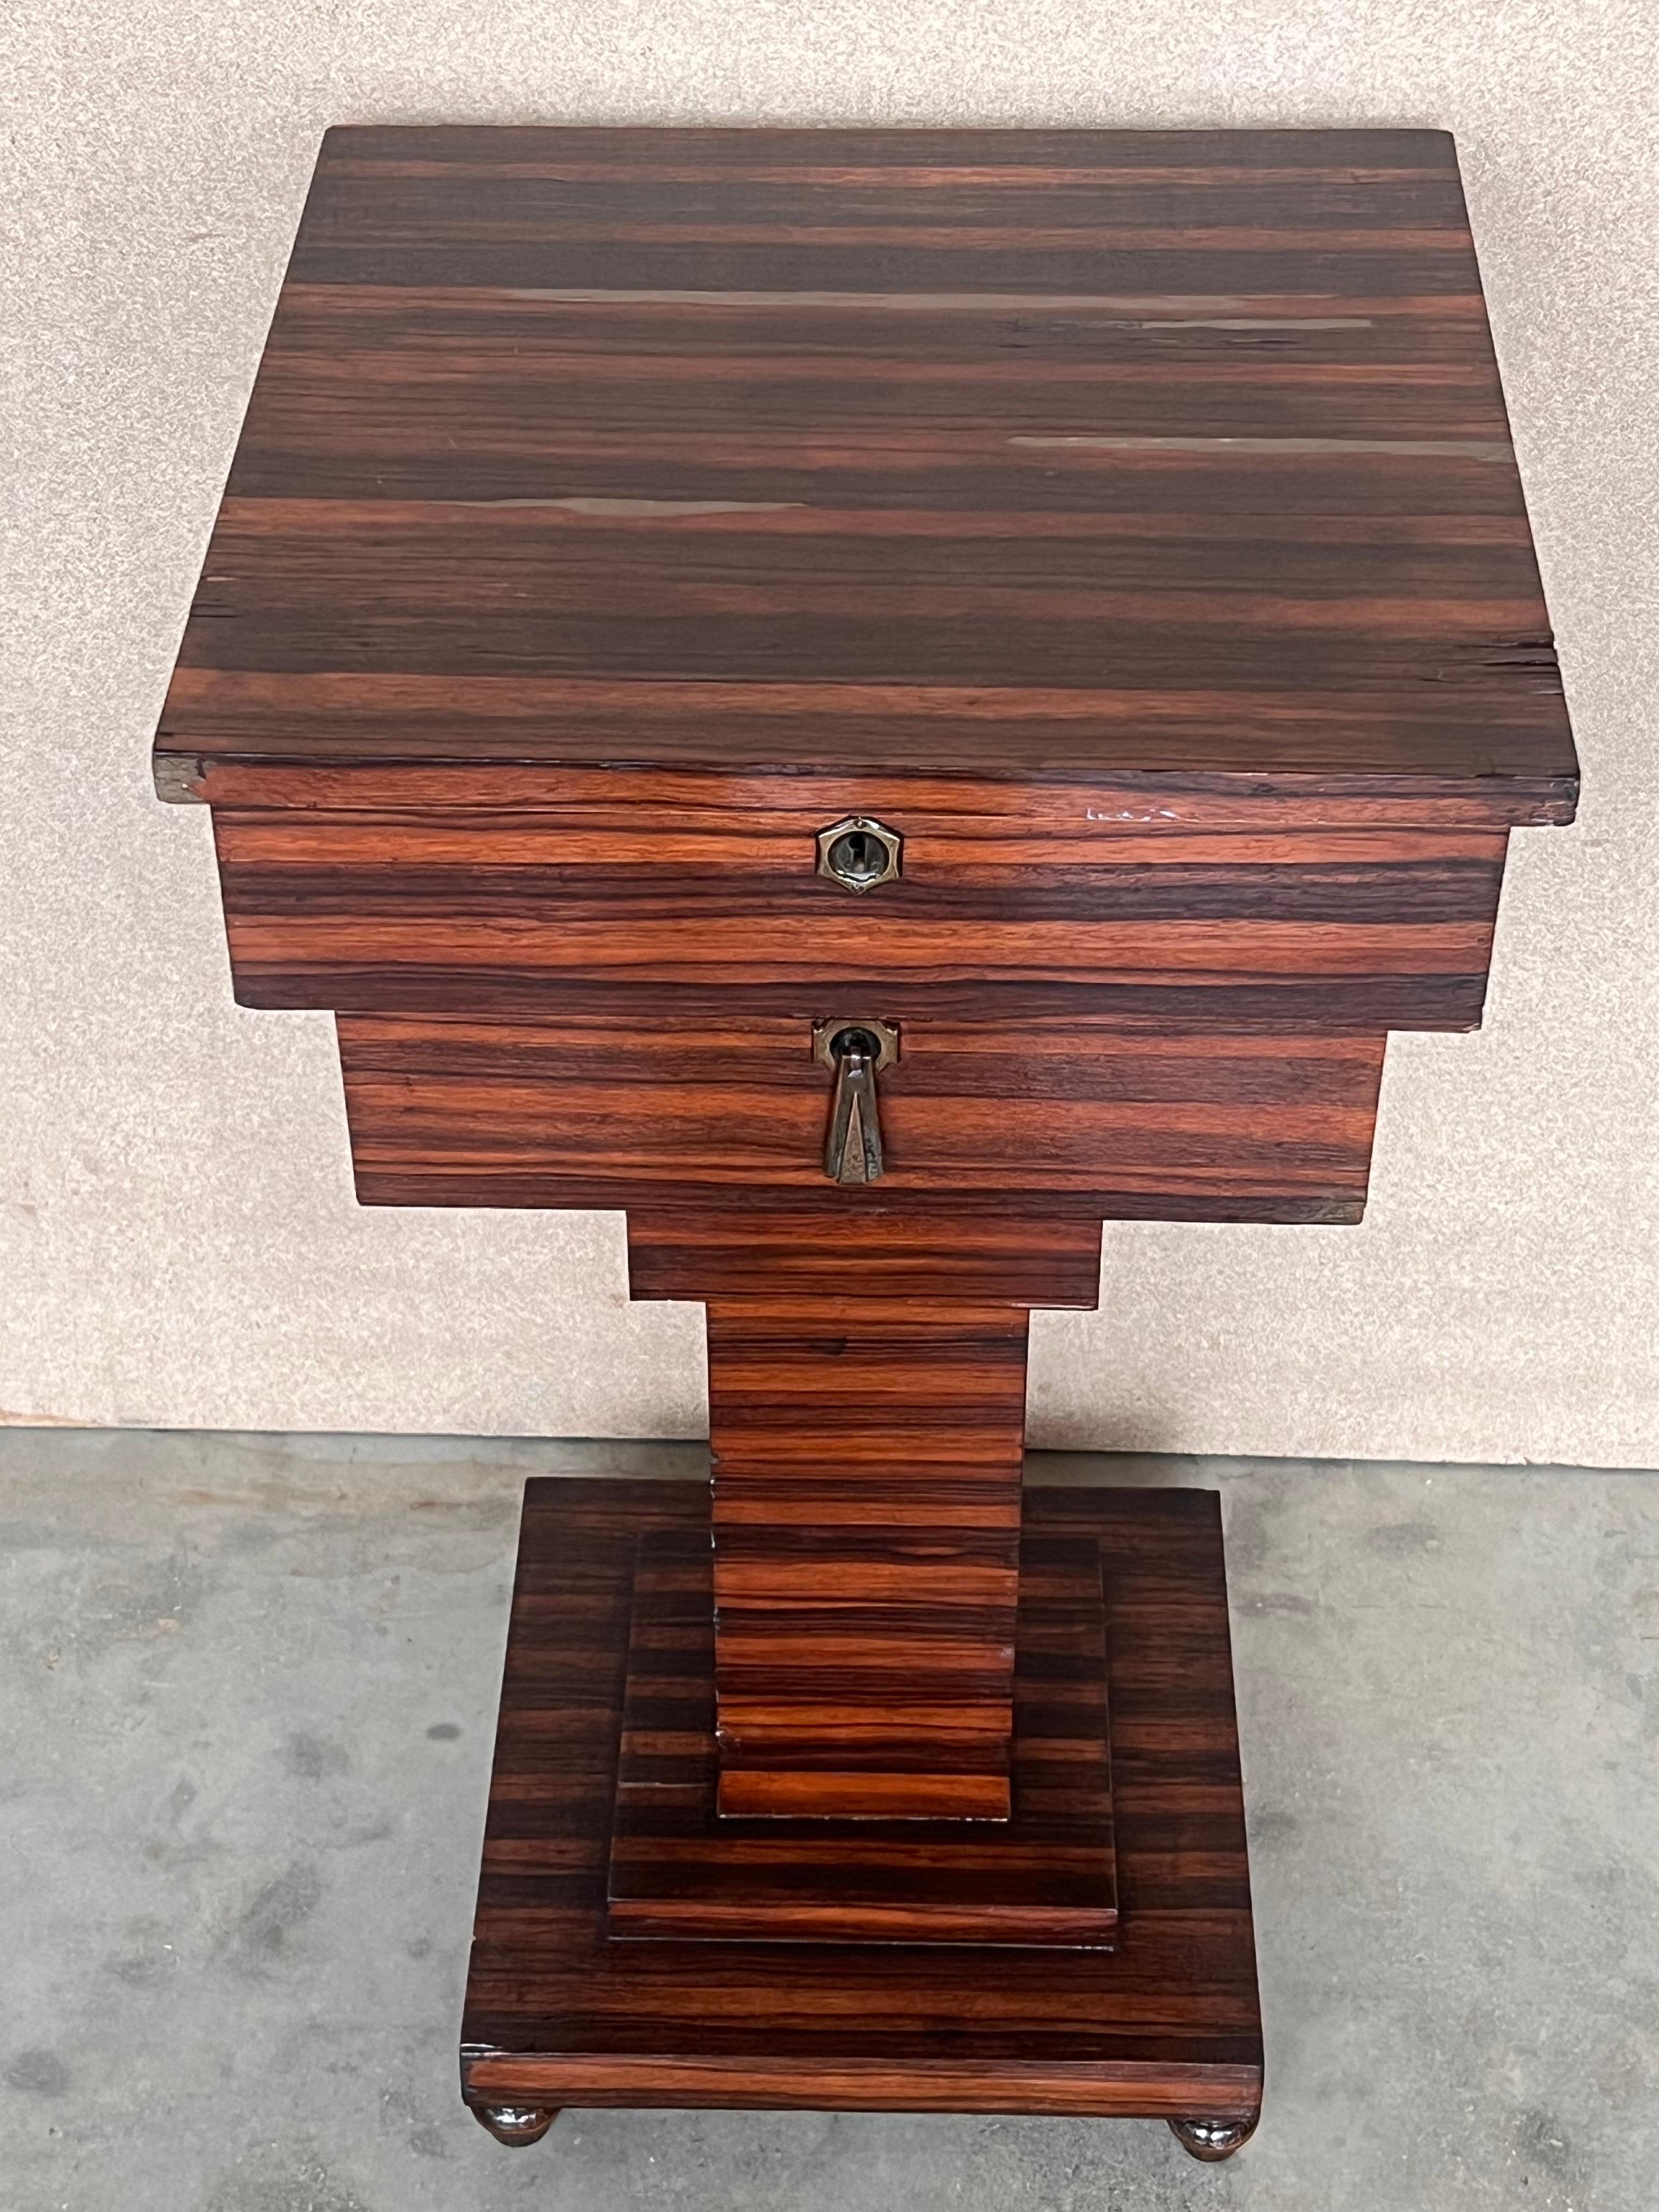 Mahogany Art Deco Sewing or Jelwery Box on Stand, circa 1860 For Sale 2